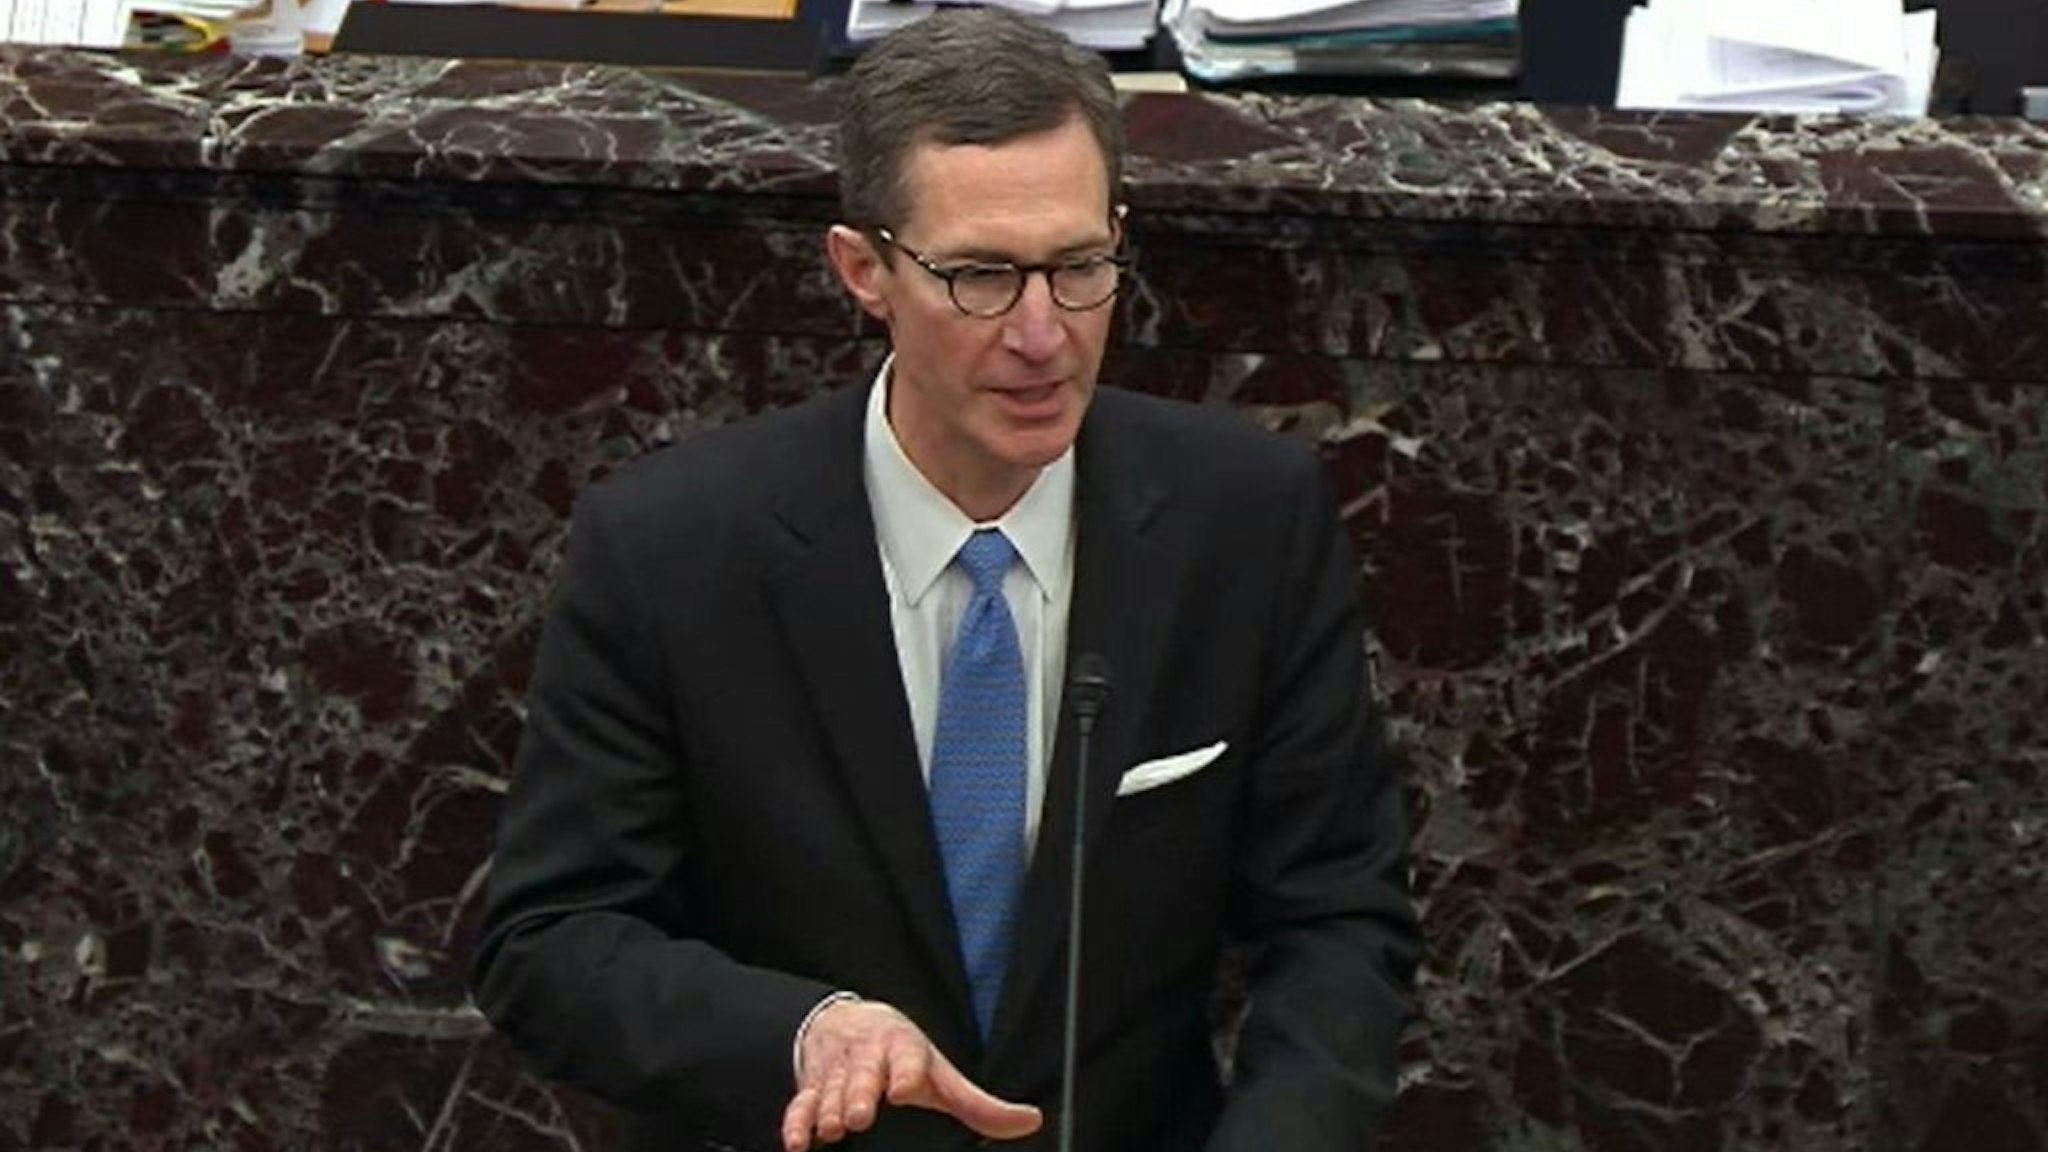 In this screengrab taken from a Senate Television webcast, Counsel for President Trump Patrick Philbin speaks during impeachment proceedings against U.S. President Donald Trump in the Senate at the U.S. Capitol on January 21, 2020 in Washington, DC. (